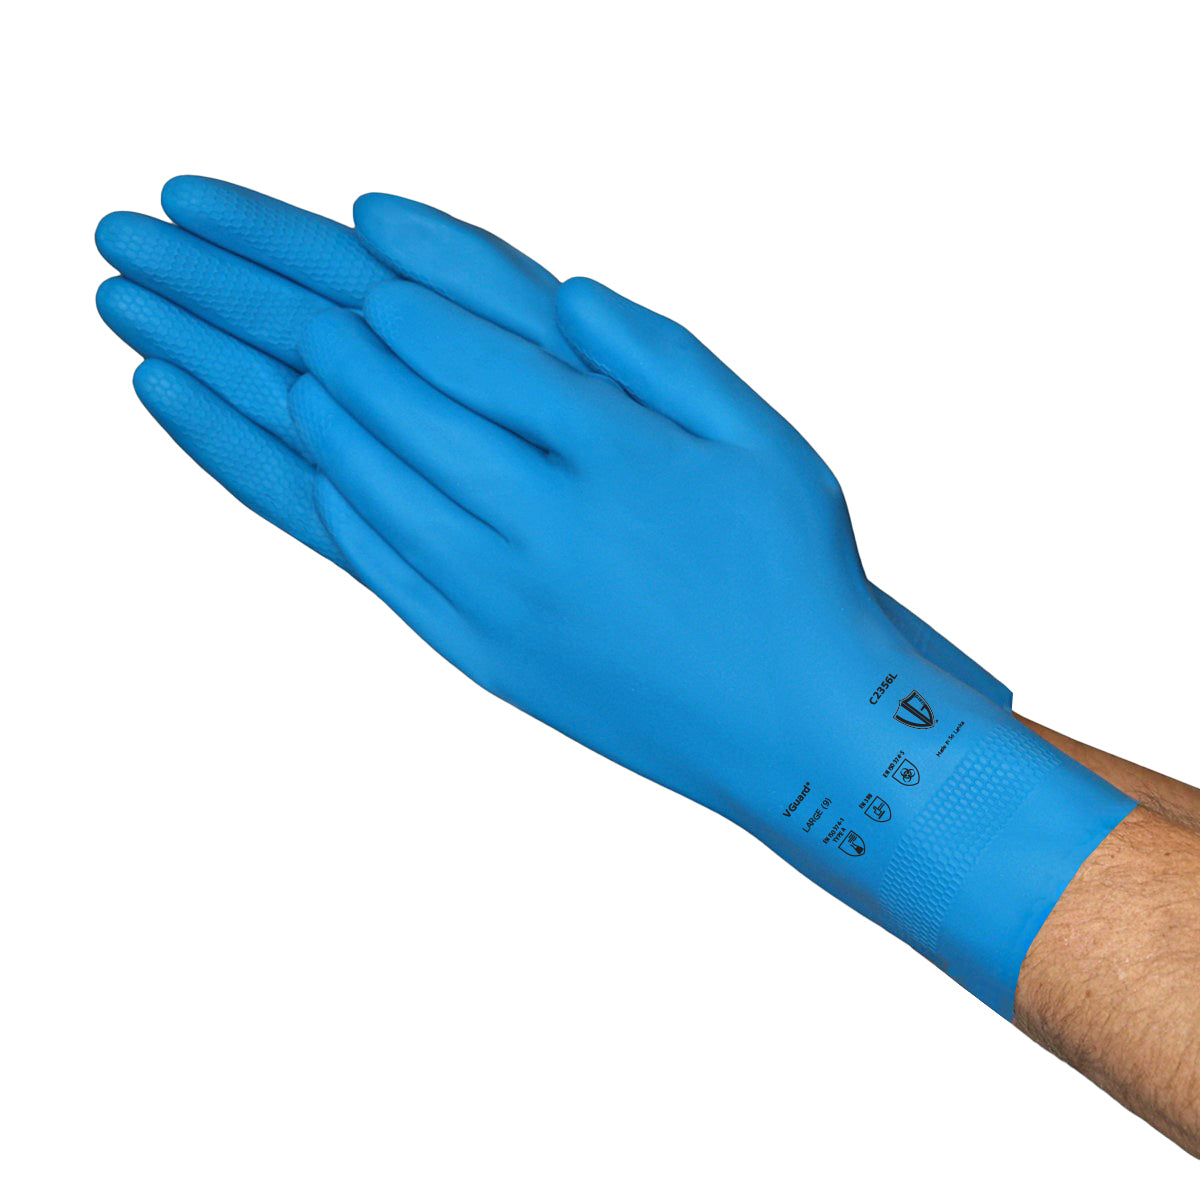 C2356 17 mil Blue Latex Canners Chemical Resistant Gloves